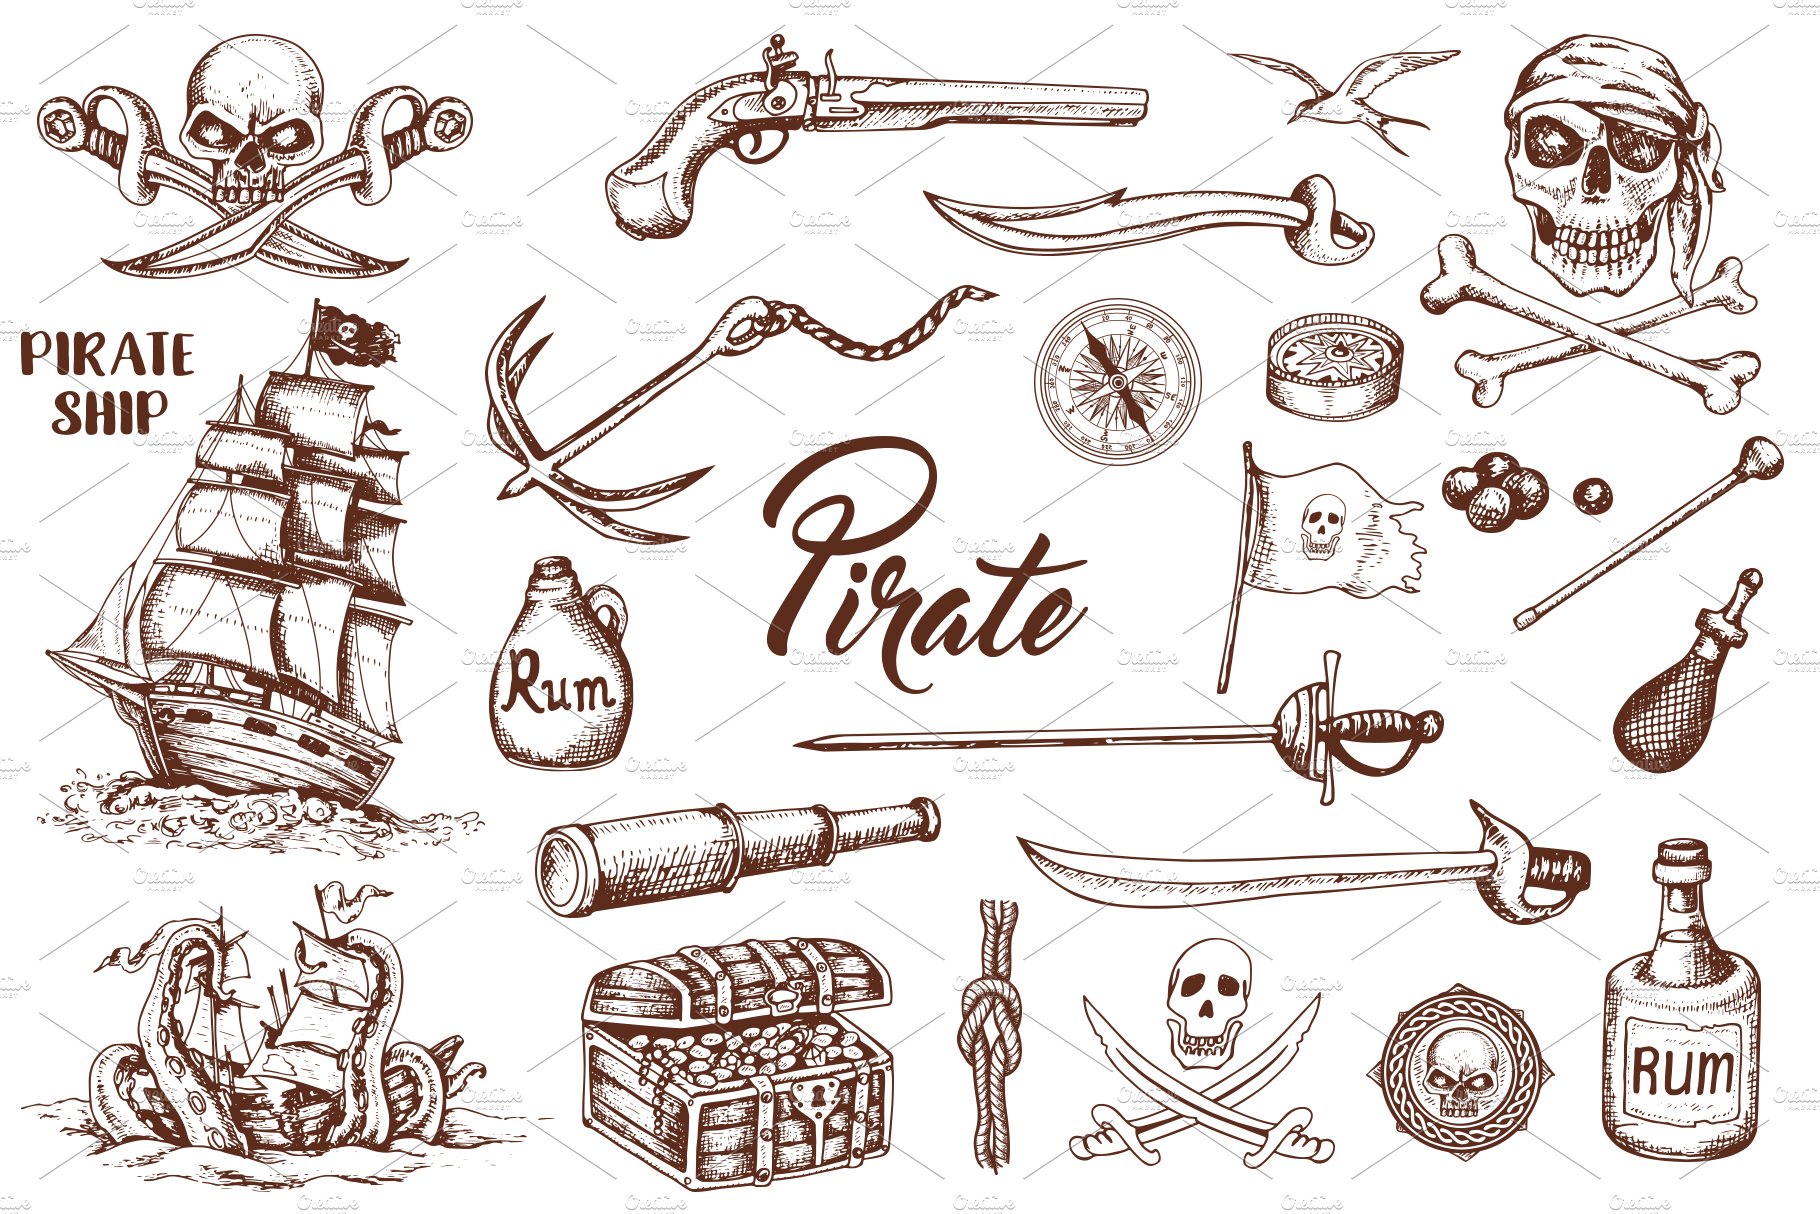 Pirate elements in a ventage style.